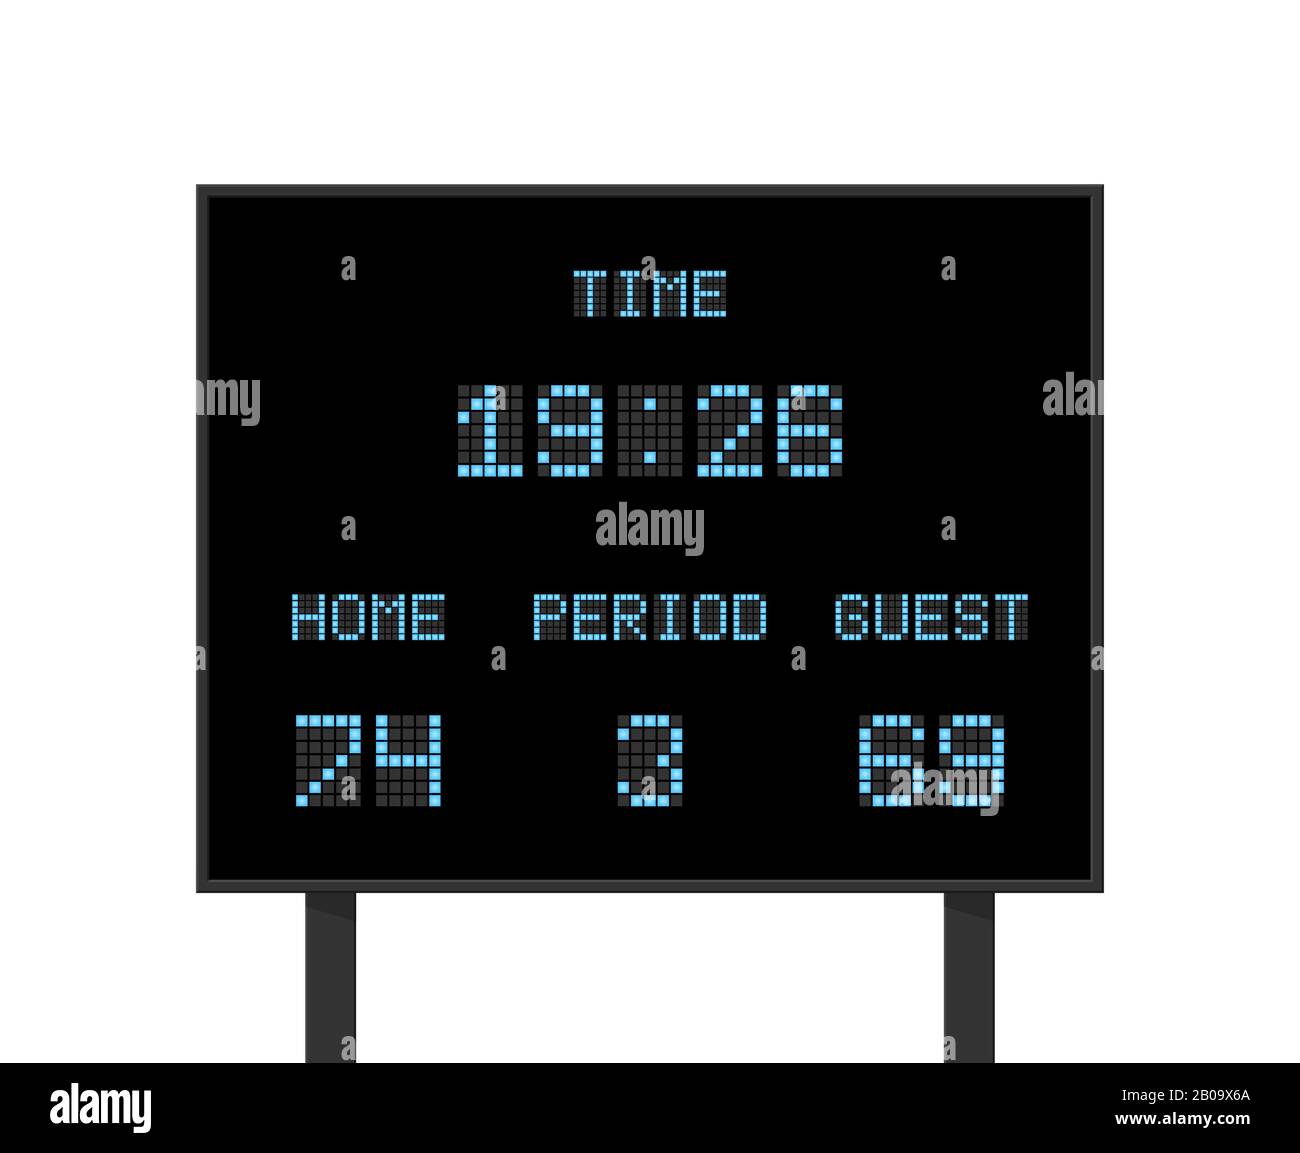 Vector digital electronic board with football or soccer score competition. Scoreboard with result competition, illustration of score board with information Stock Vector